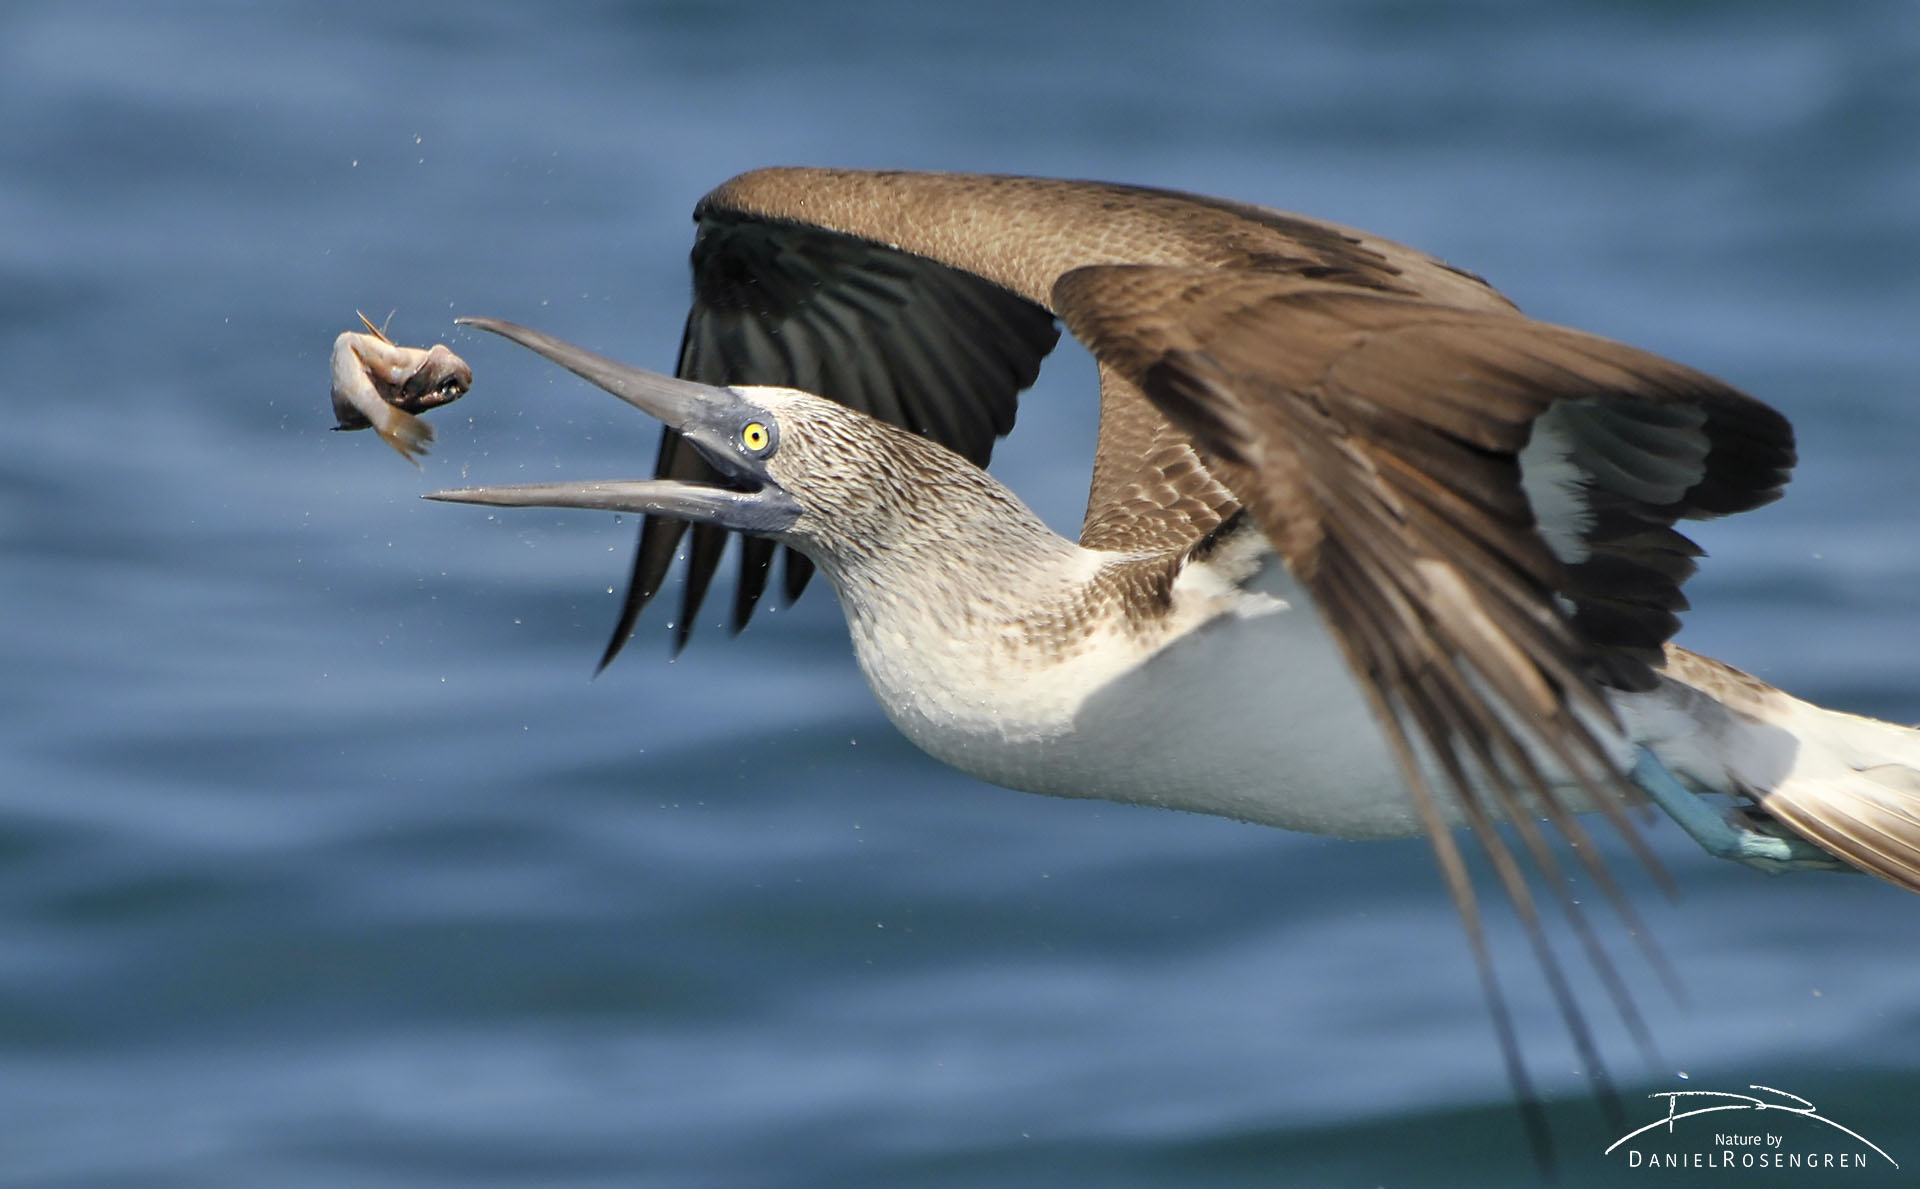 A Blue-footed booby adjusting its grip of the fish by throwing it in the air, mid flight. © Daniel Rosengren